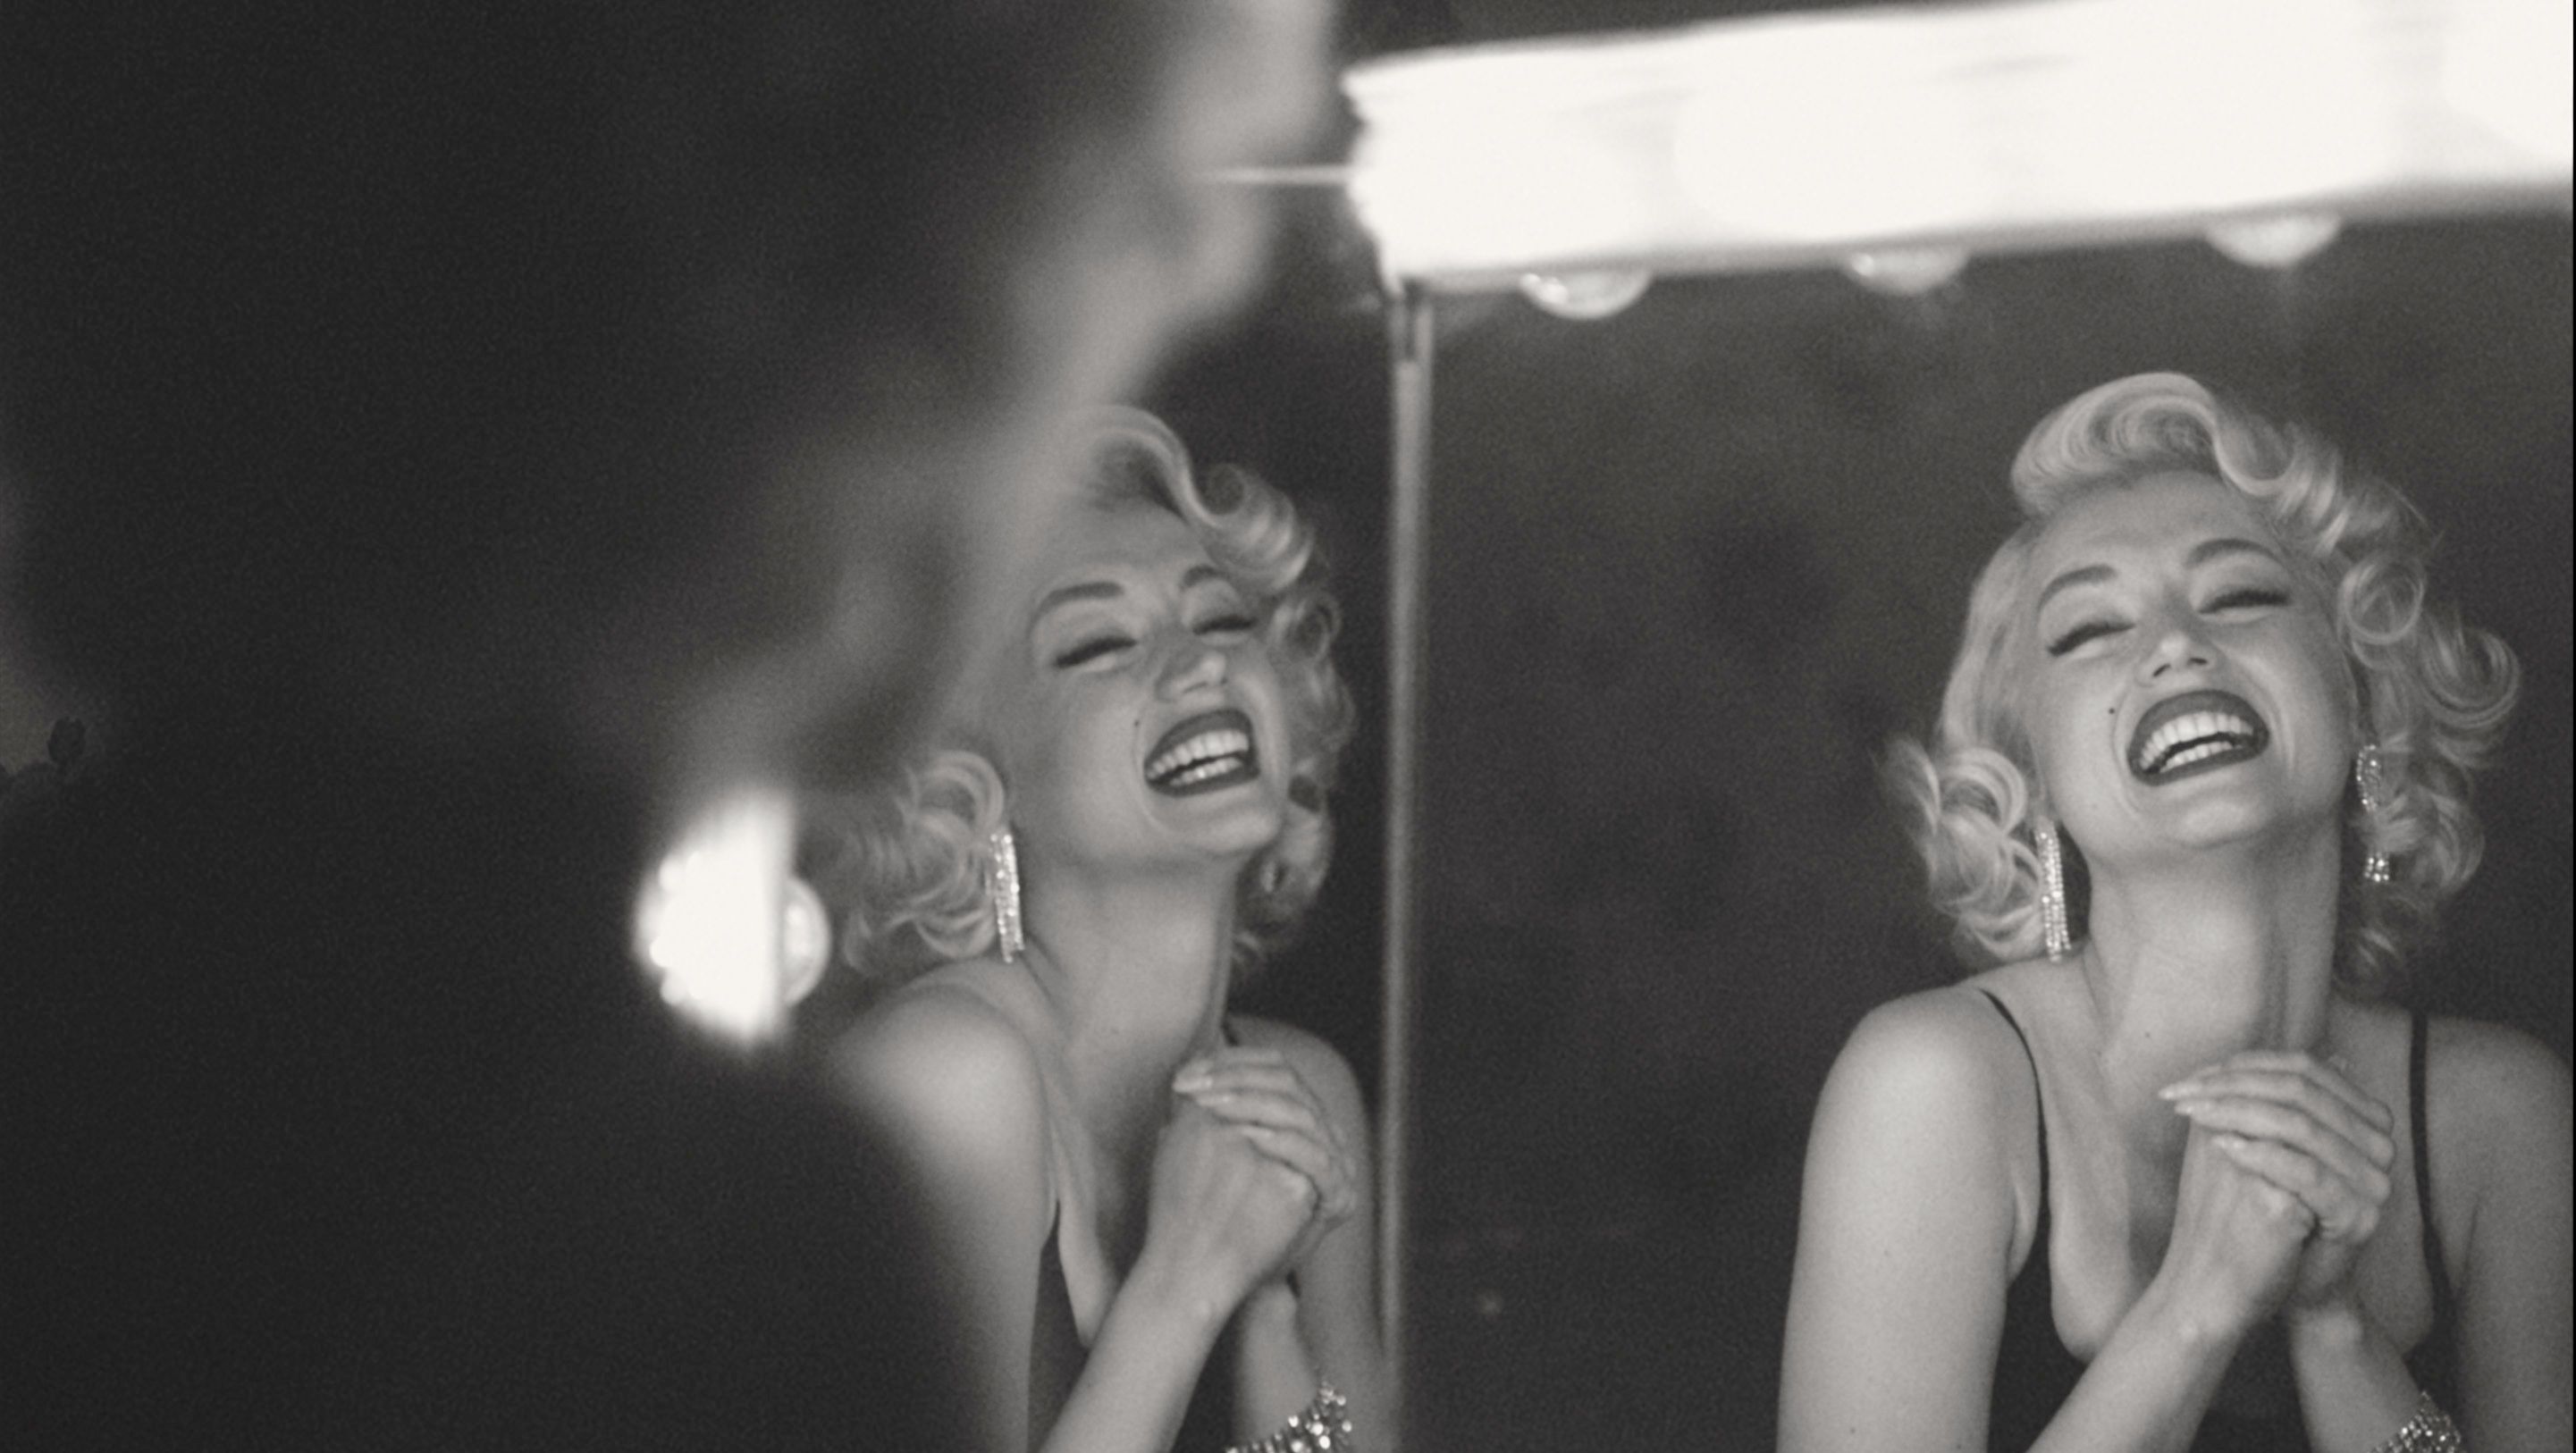 The real story of Marilyn Monroe: who was the woman behind the mask?